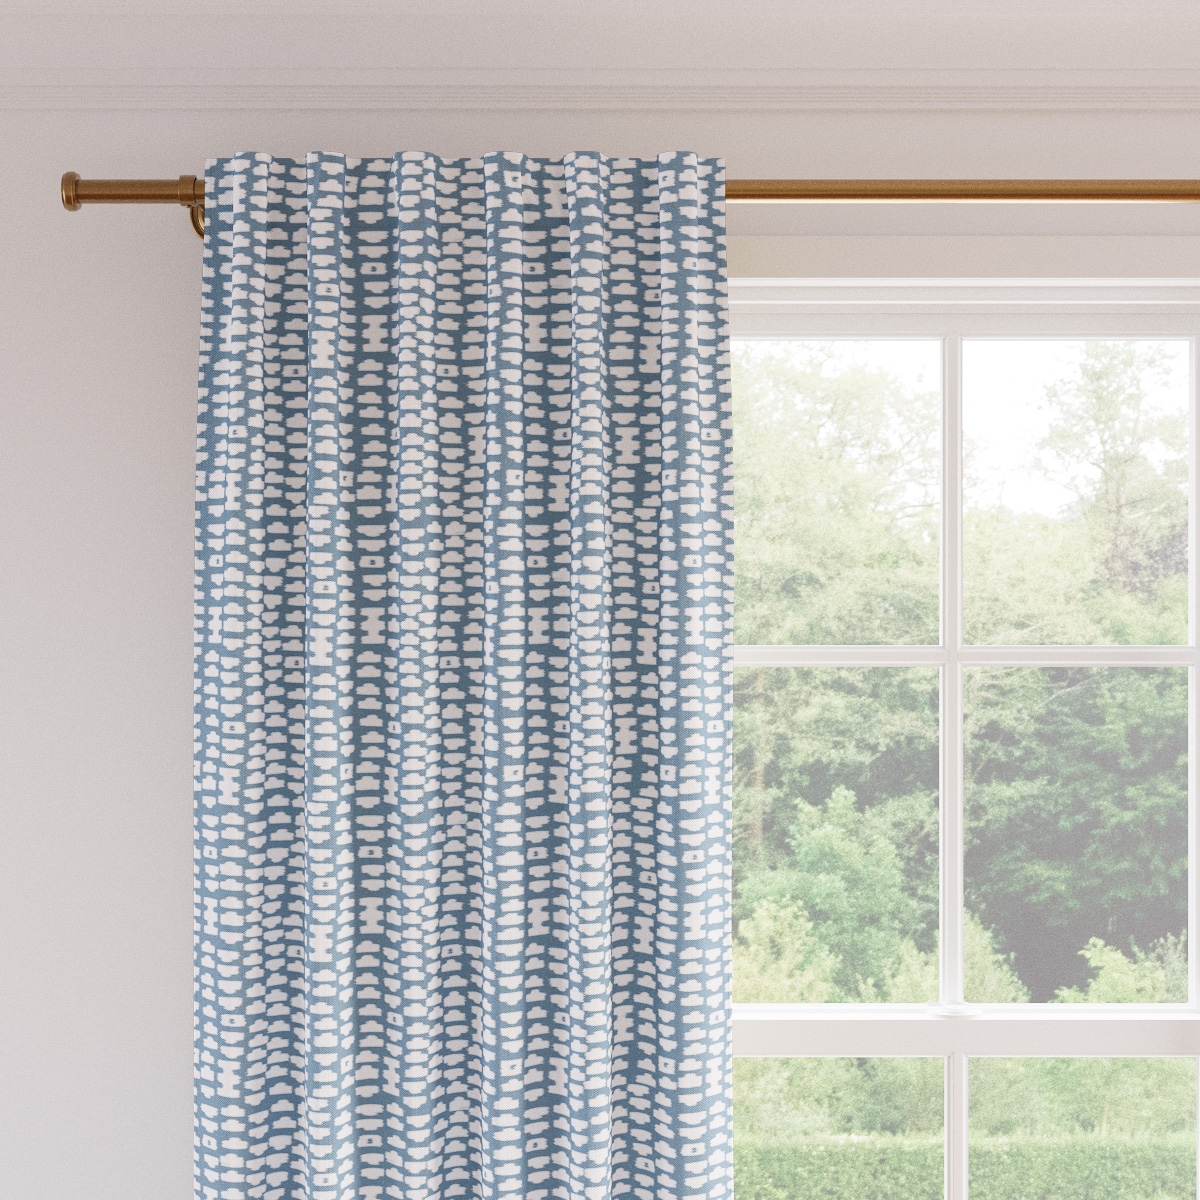 Printed Linen Curtain, Dusty Blue Odalisque, 50" x 96" - Image 1